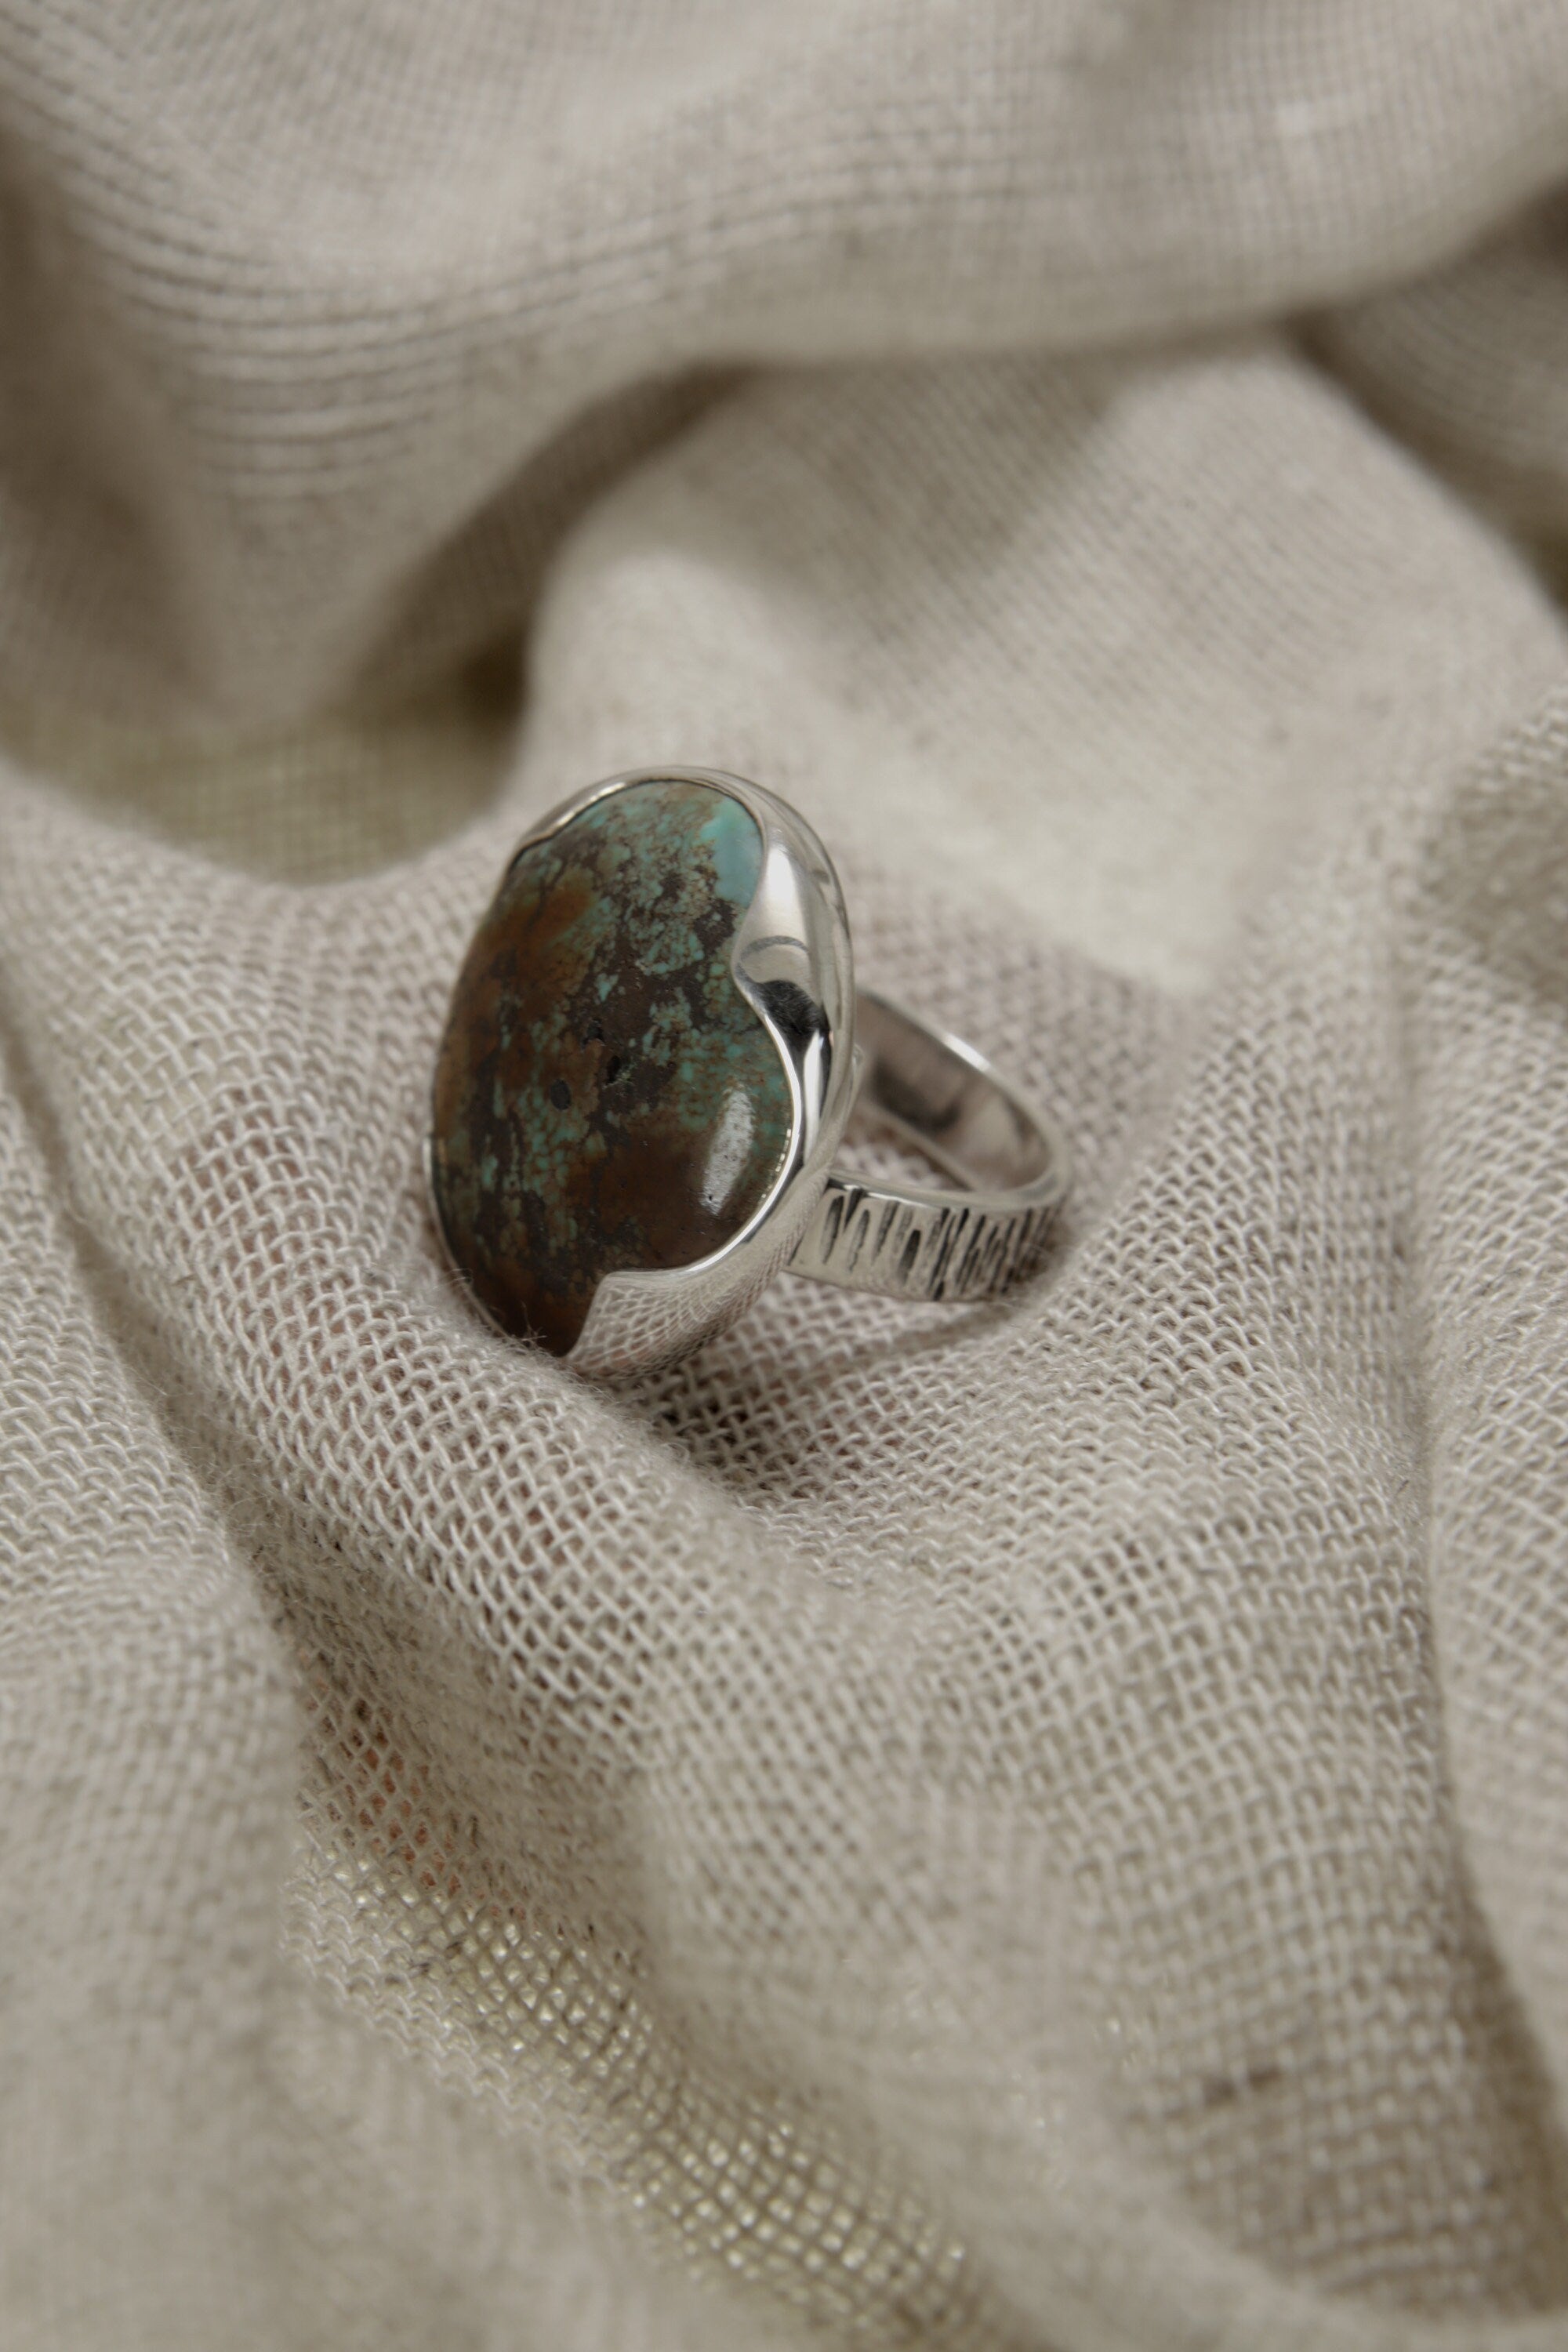 Himalayan Serenity: Adjustable Sterling Silver Ring with Himalayan Turquoise - Unisex - Size 5-12 US